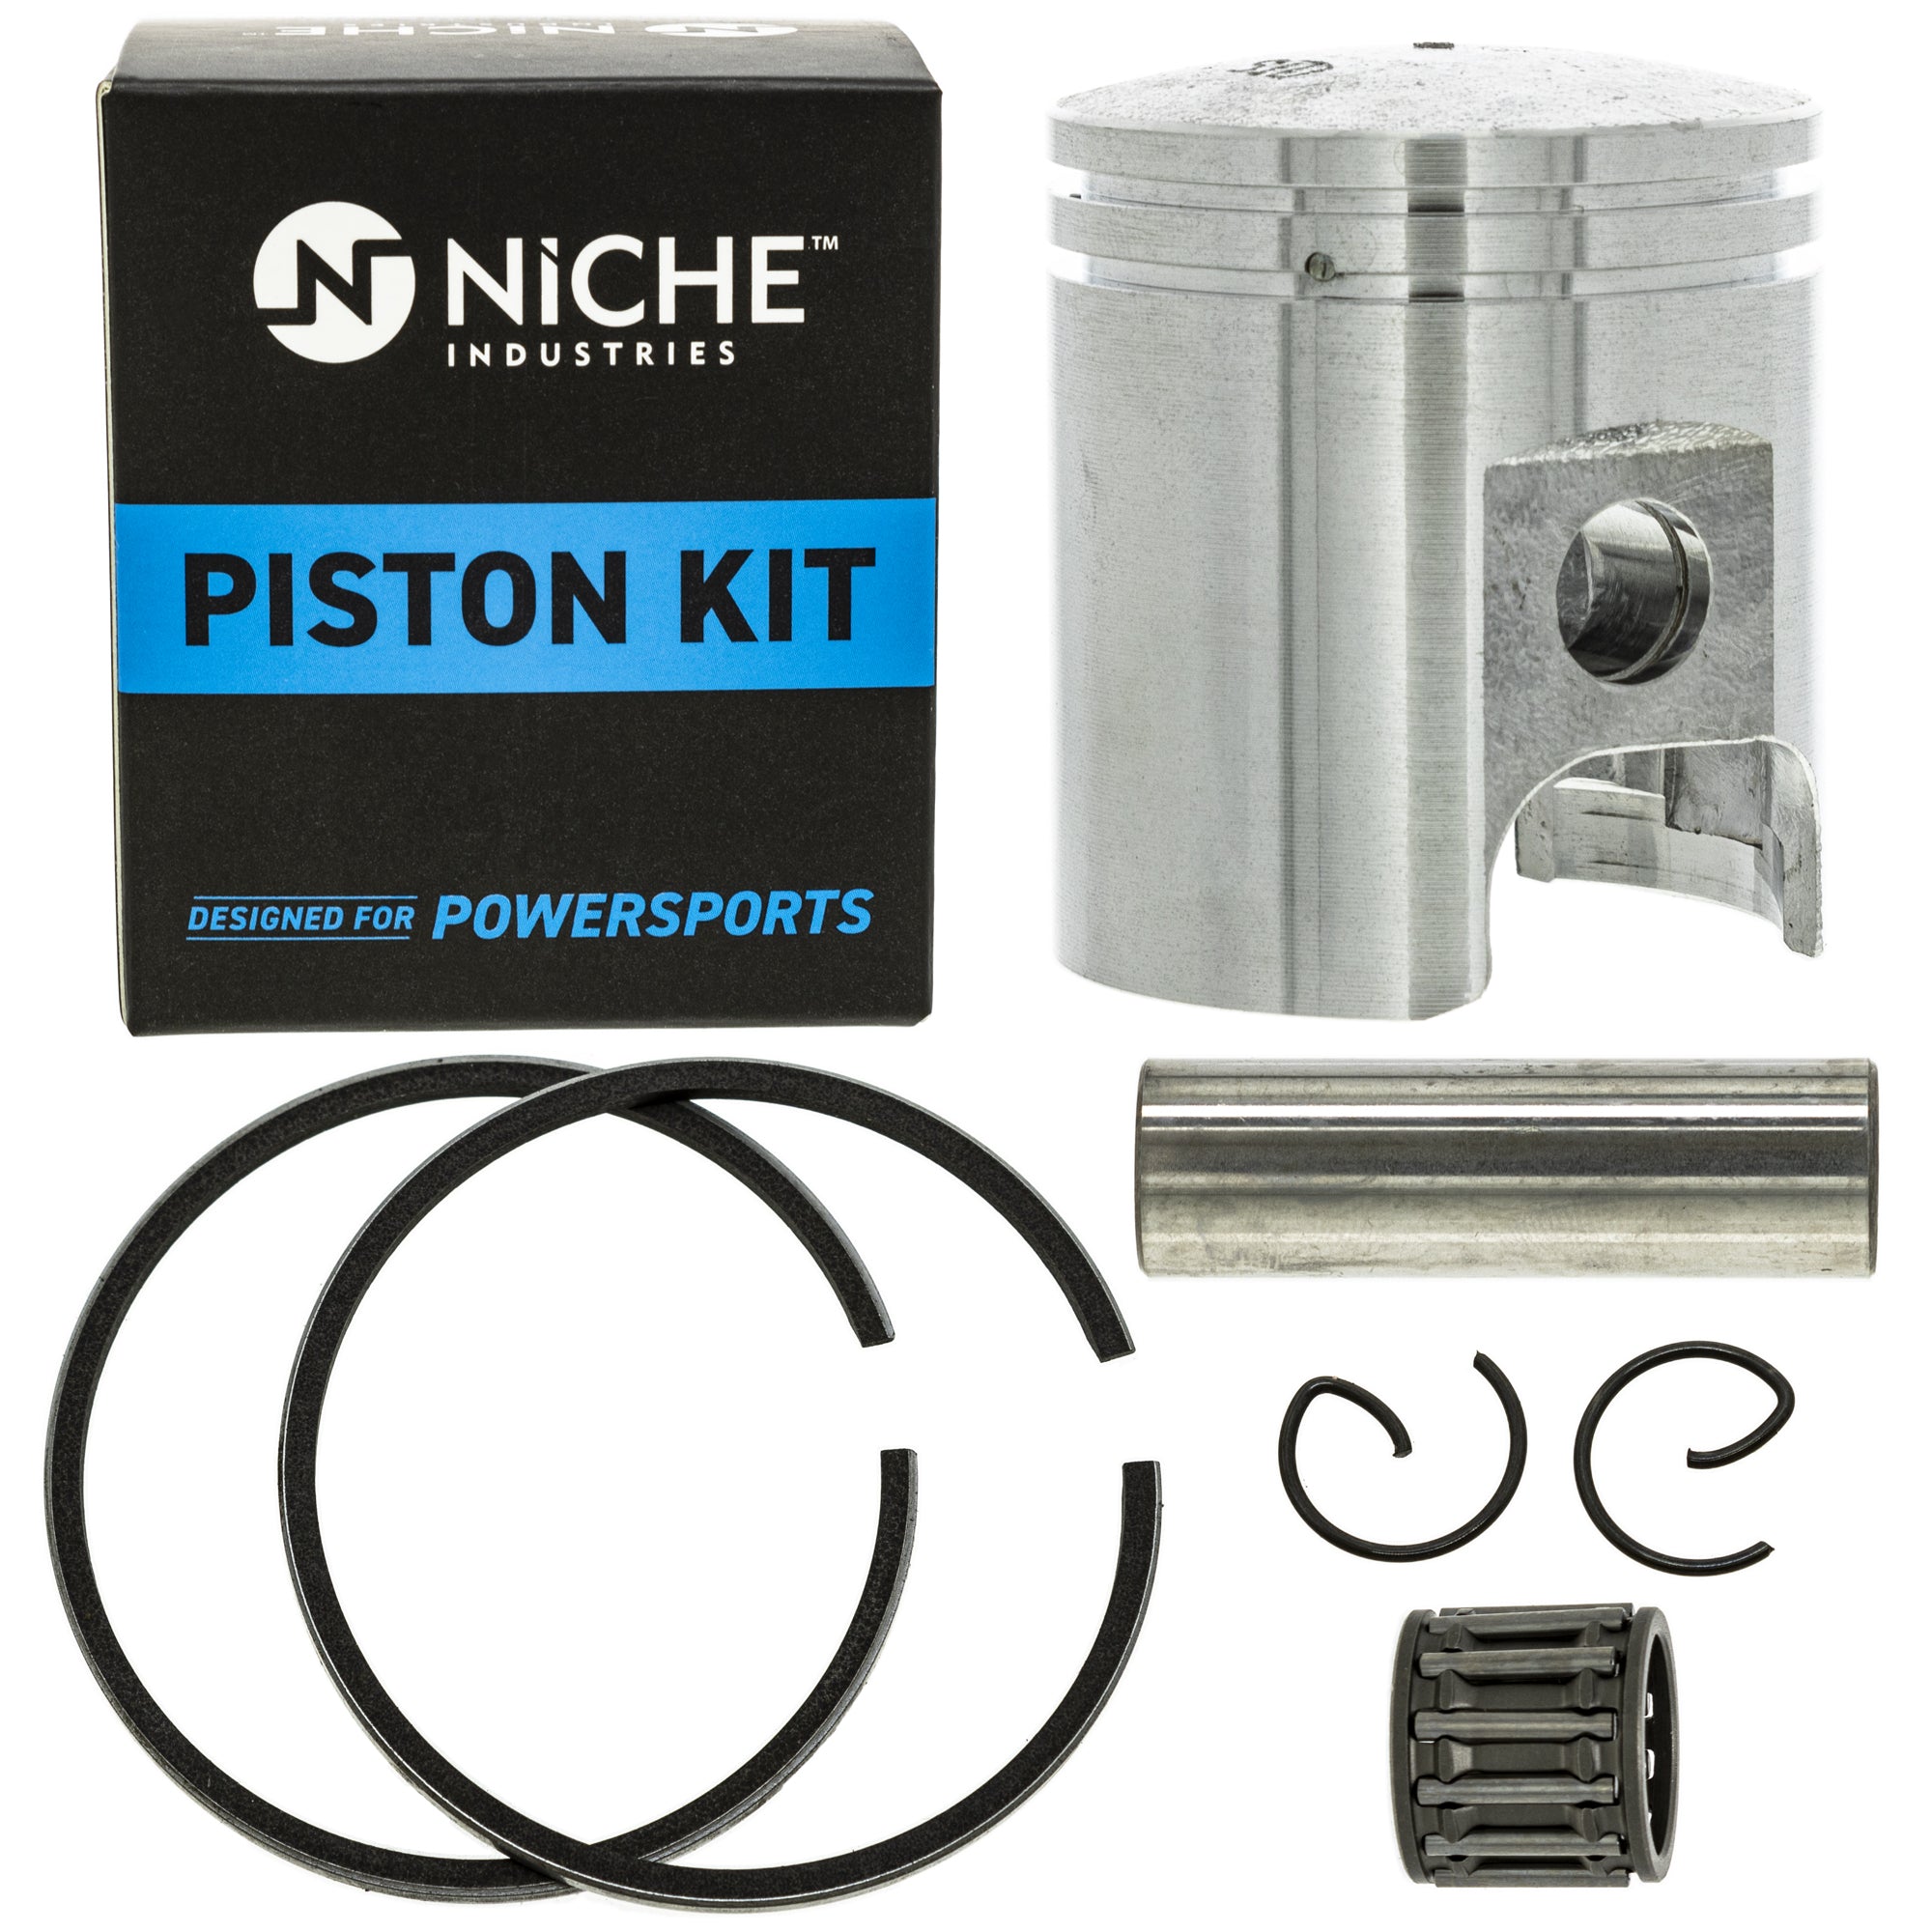 Piston Kit for zOTHER Yamaha PW50 93310-210M0-00 36R-11601-20-00 36R-11601-10-00 NICHE 519-KPS2230T